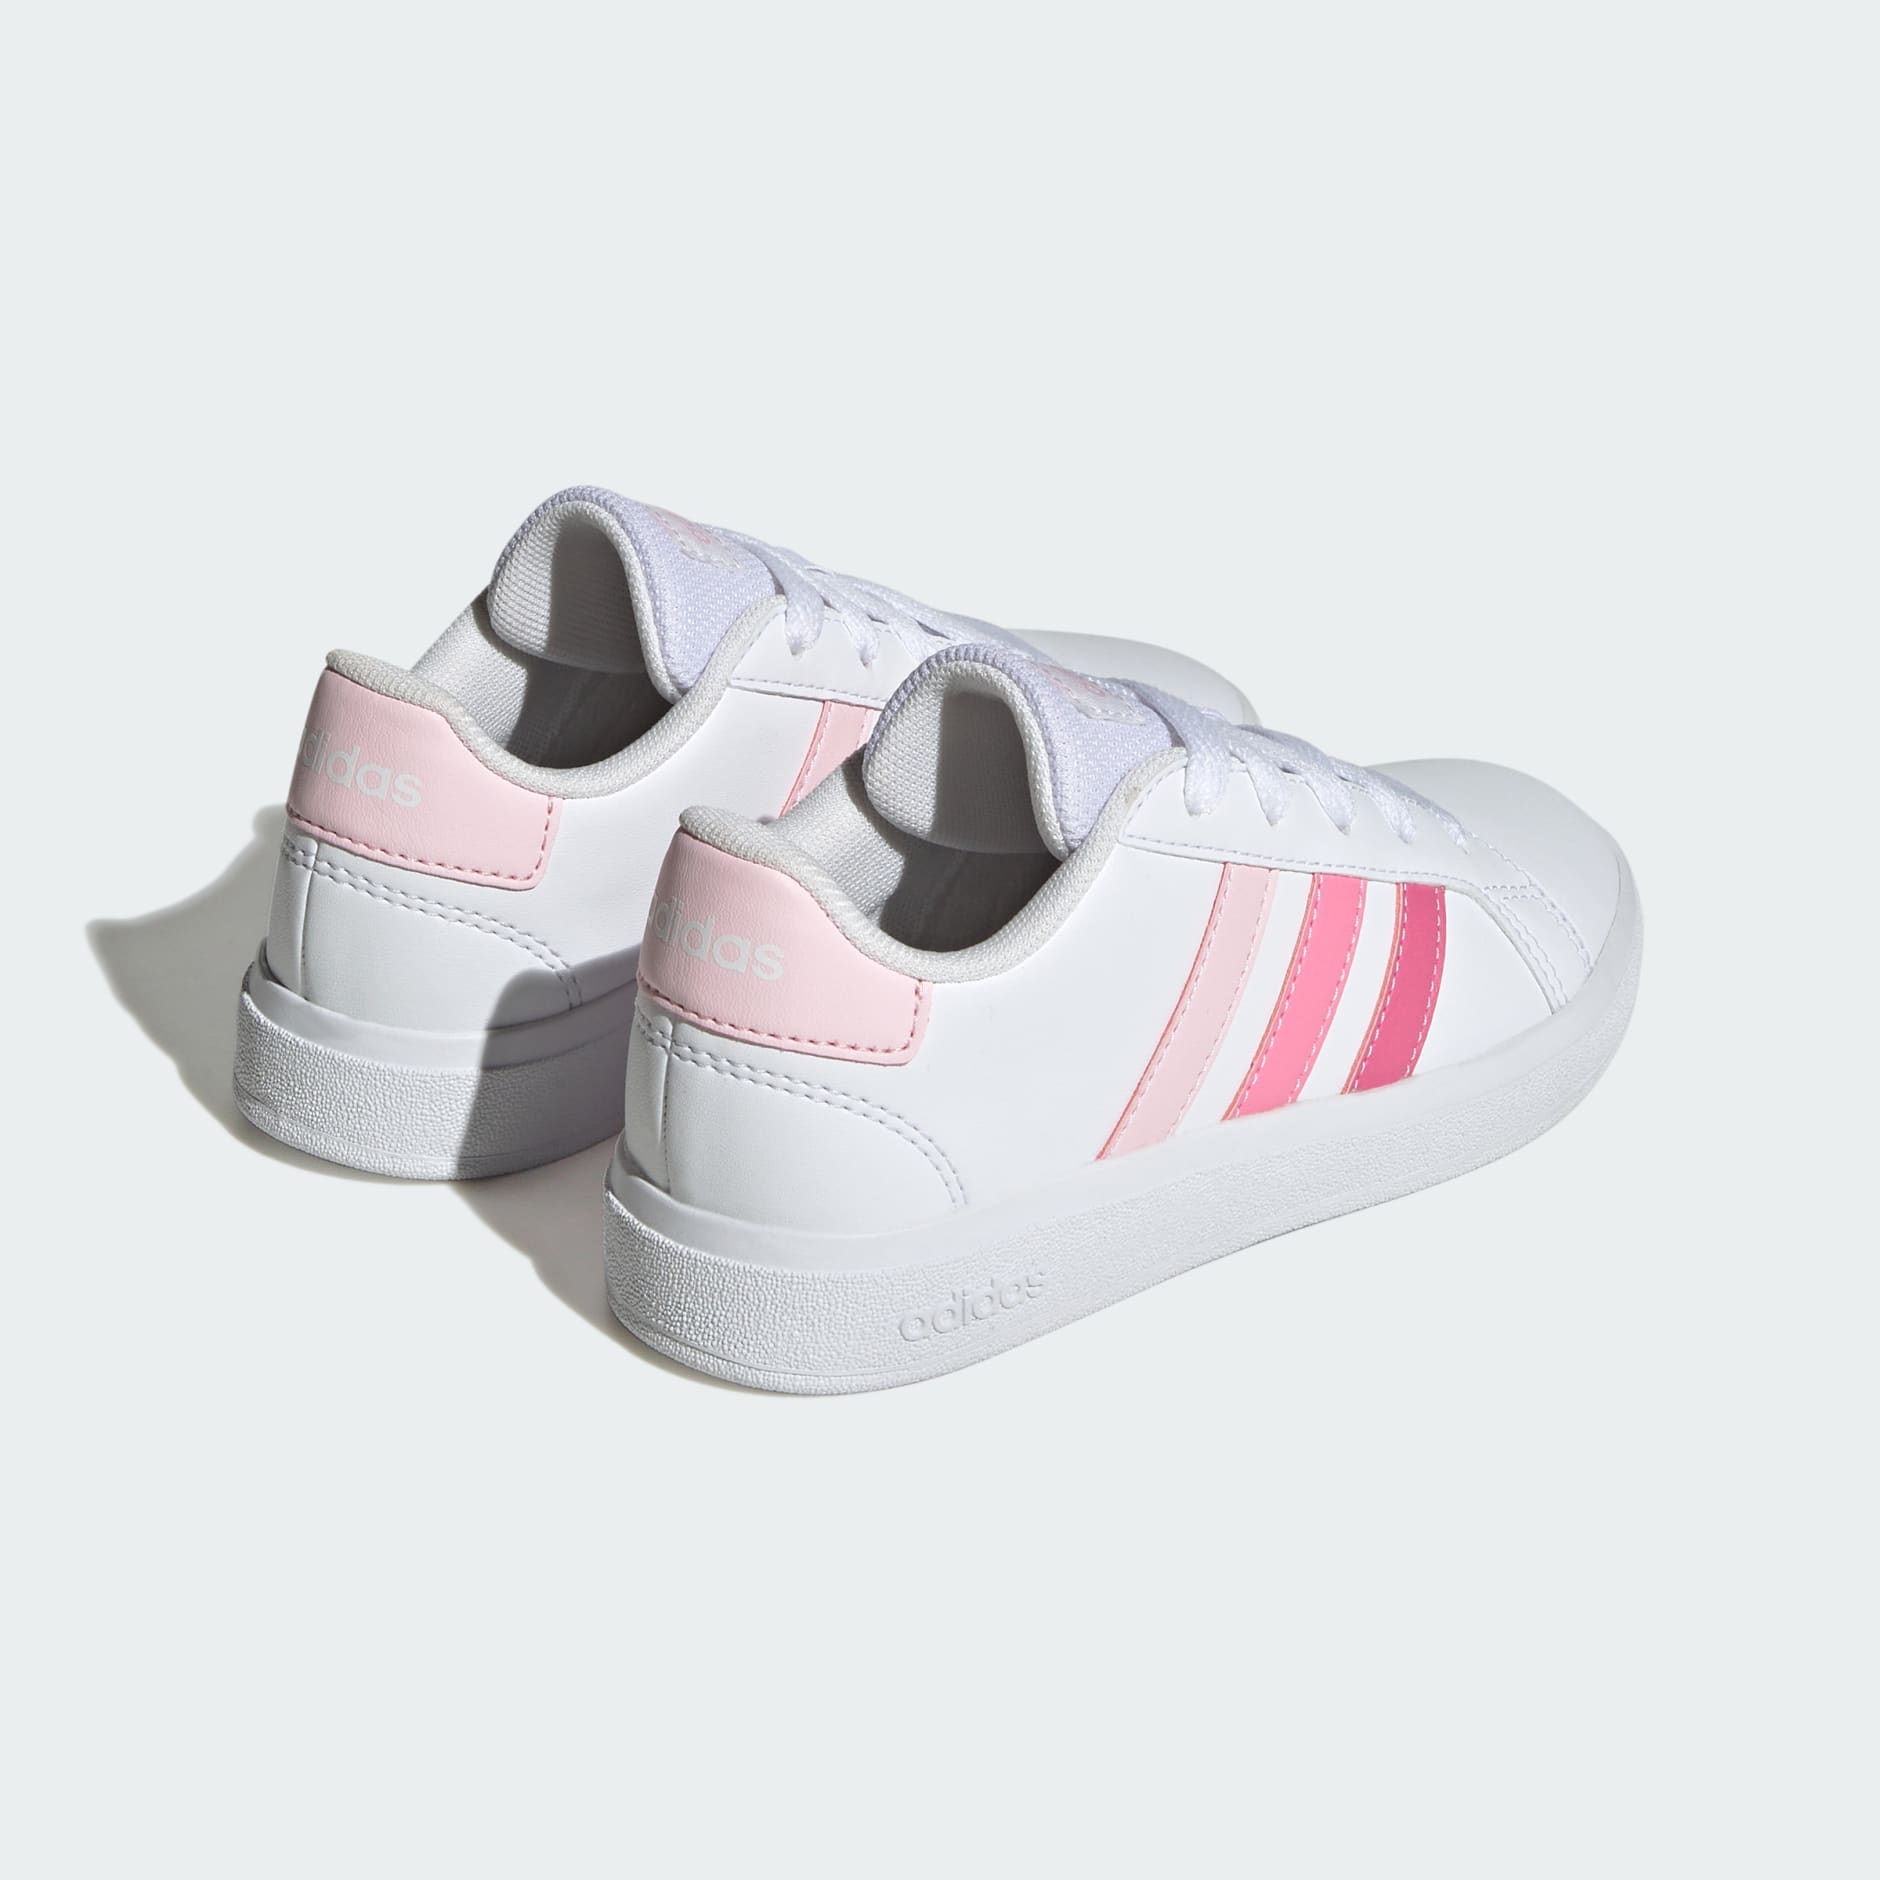 Shoes - Grand Court Lifestyle Tennis Lace-Up Shoes - Pink | adidas ...